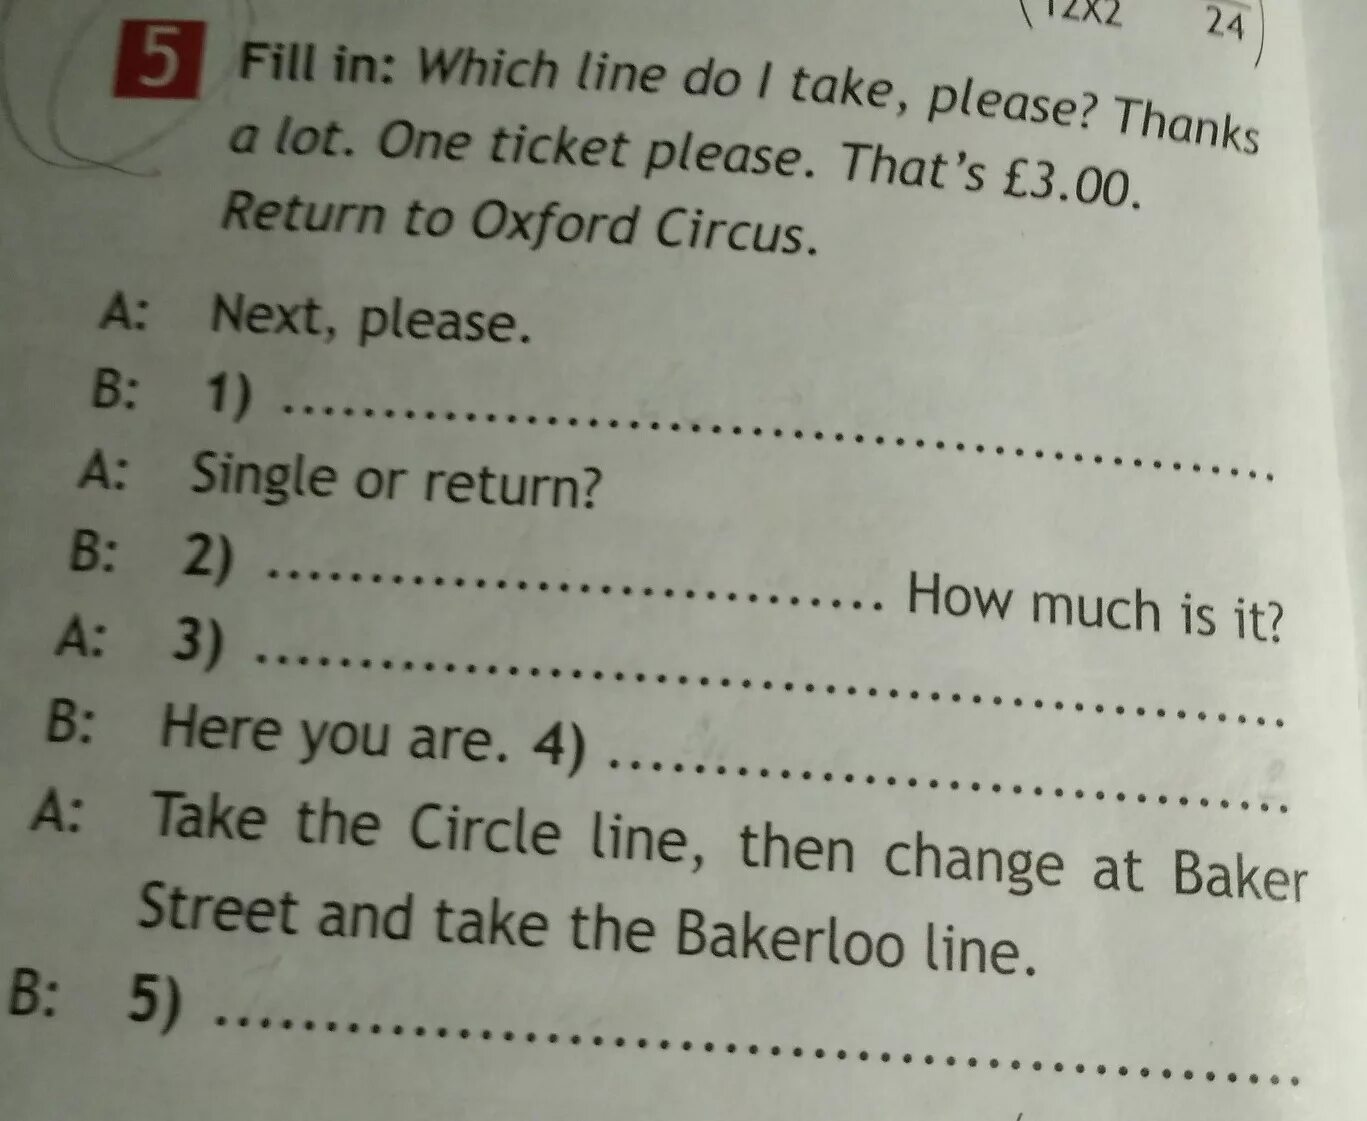 Fill in whichever. Complete the Dialogue use which line do i take please. Complete the Dialogue use which line do take please thanks a lot one ticket please that's£ 3 00 Return to Oxford Circus. Thanks a lot. Nest please two tickets please как читается.